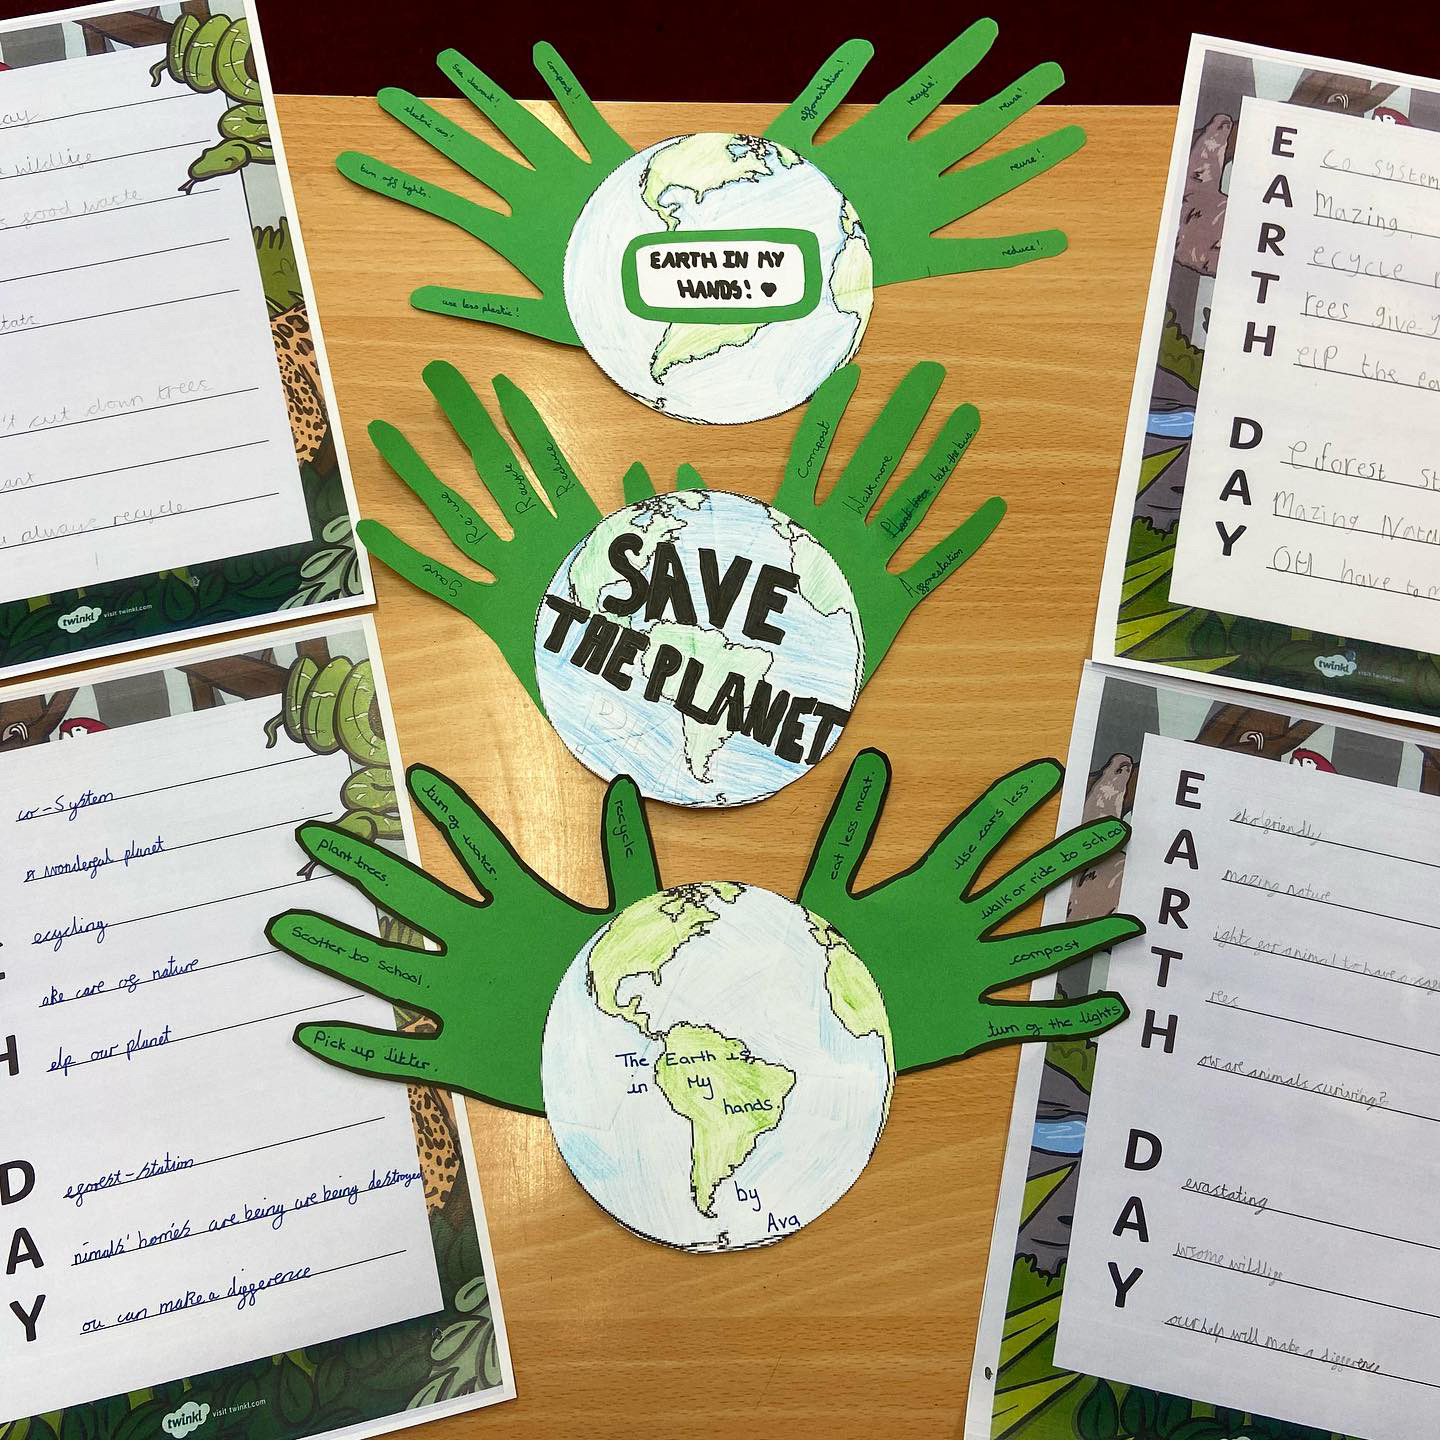 Purbrook celebrated Earth Day 2021 on April 22nd. Classes focused on ways in which to reduce their carbon footprint were discussed including the importance of the Paris Climate Summit Agreement. Children expressed their thoughts and ideas through acrostic poems and stimulating art work.